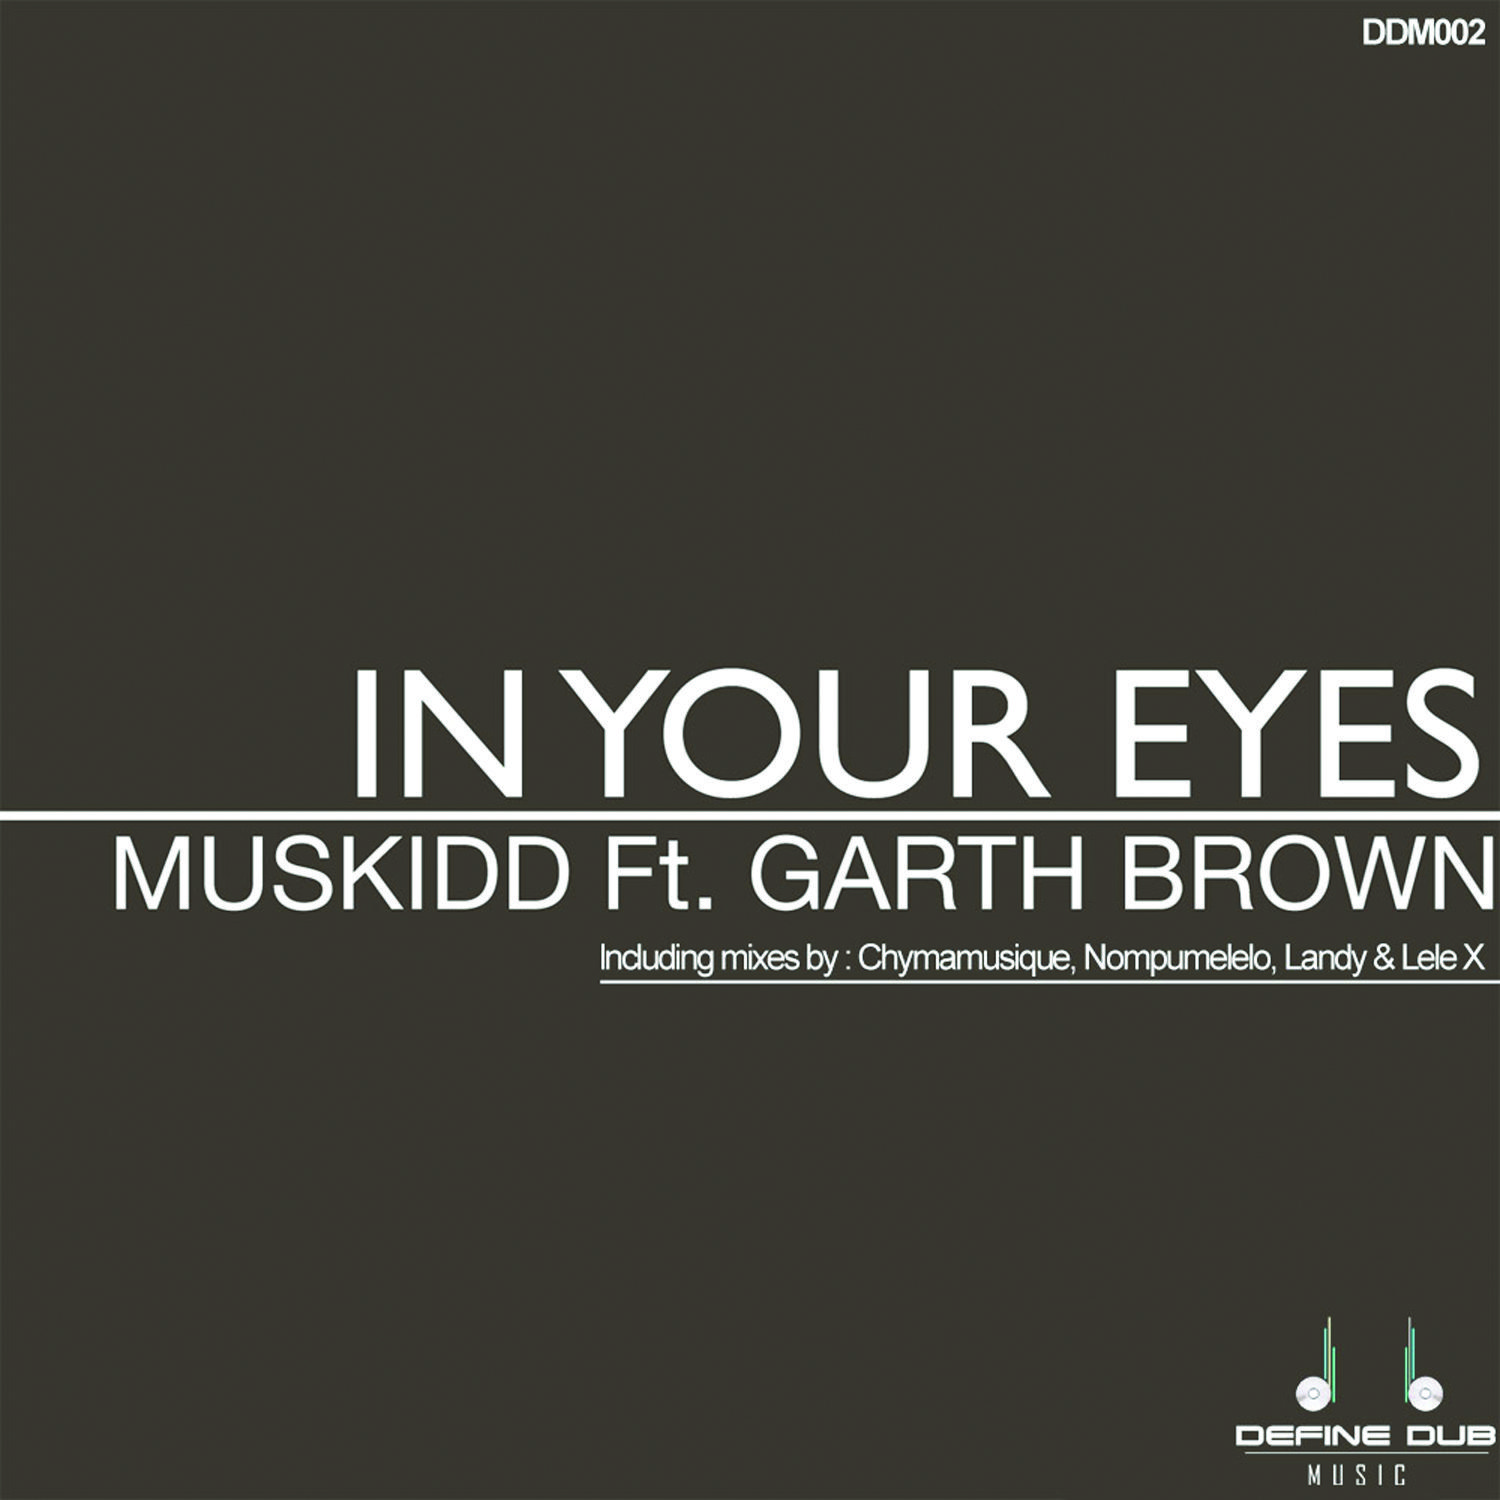 Muskidd - In Your Eyes (Chymamusique's Soulful Mix)